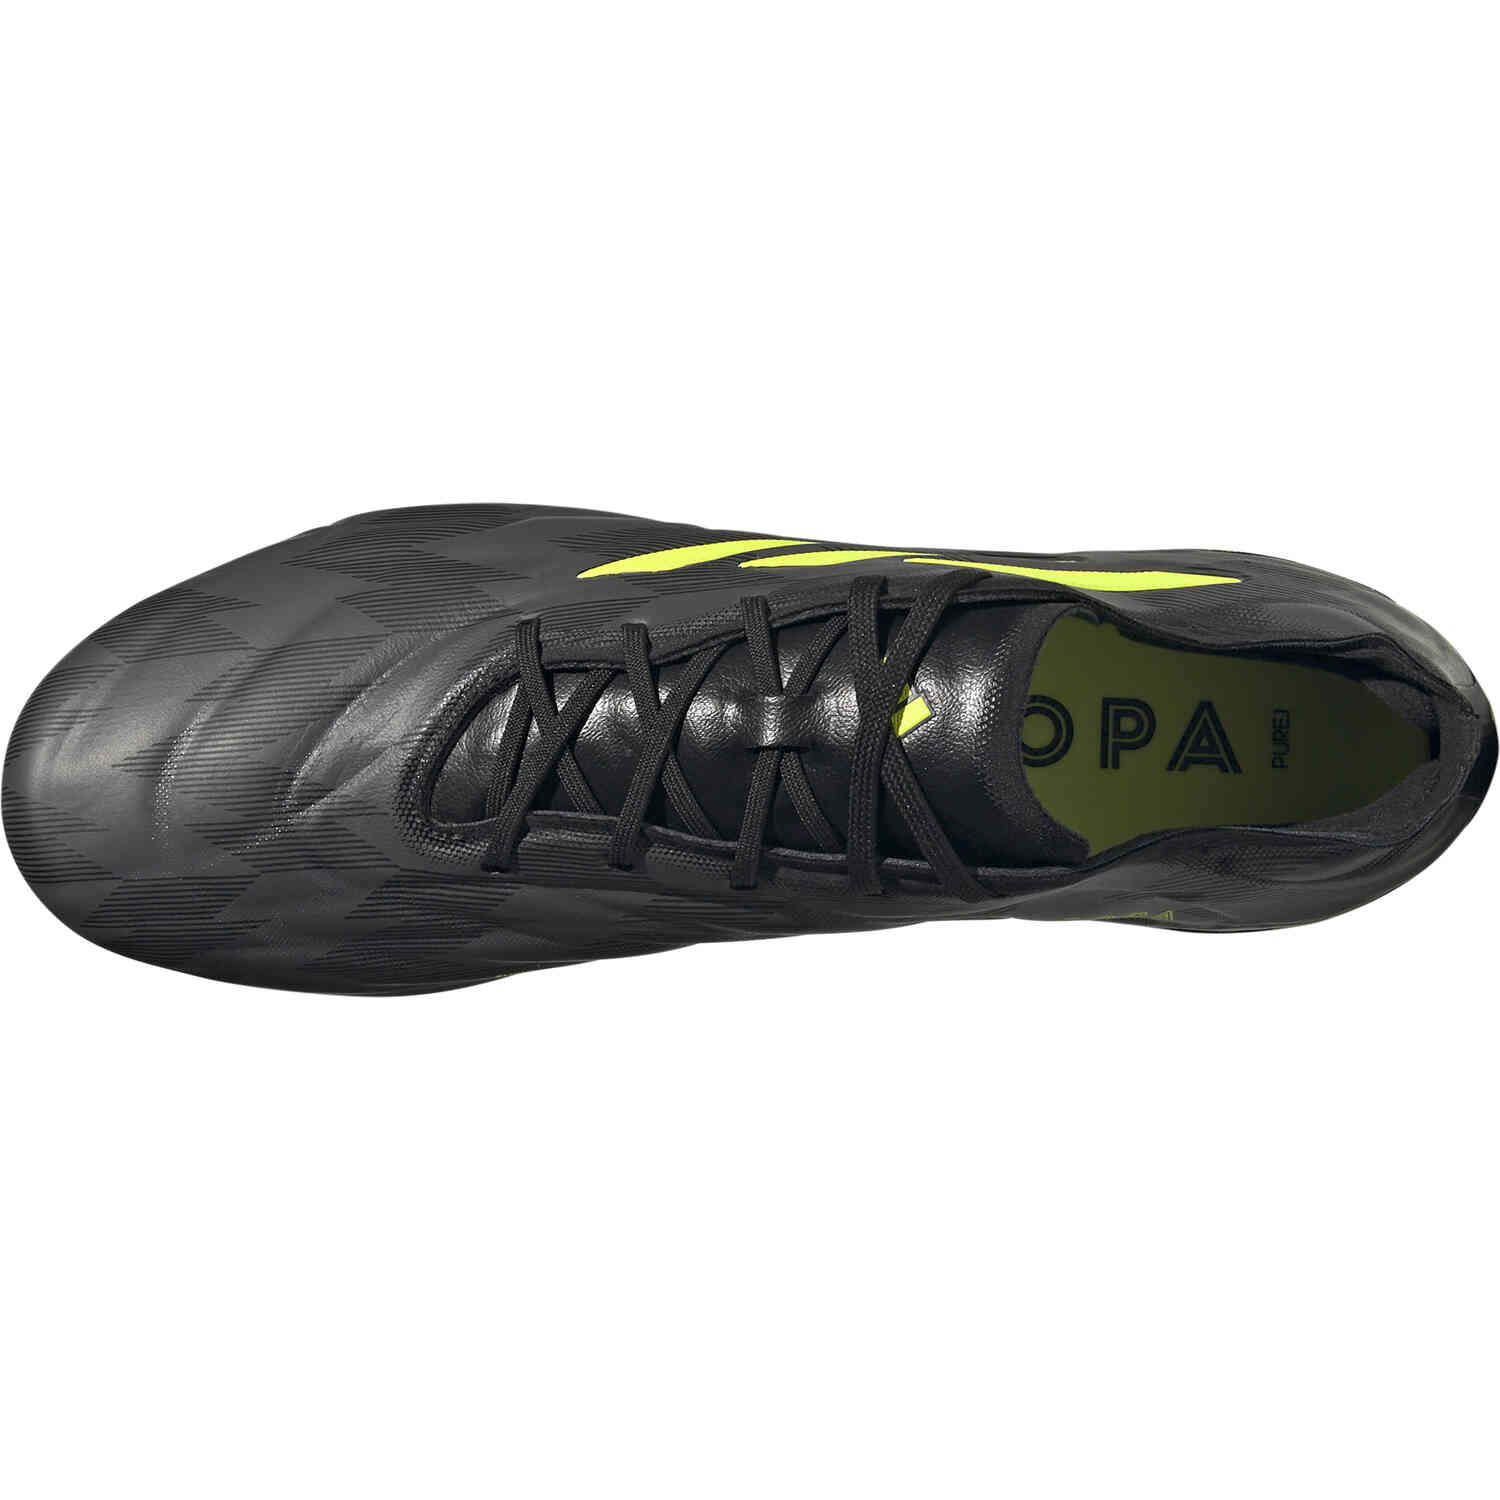 adidas Copa Pure.1 FG - Crazycharged - SoccerPro